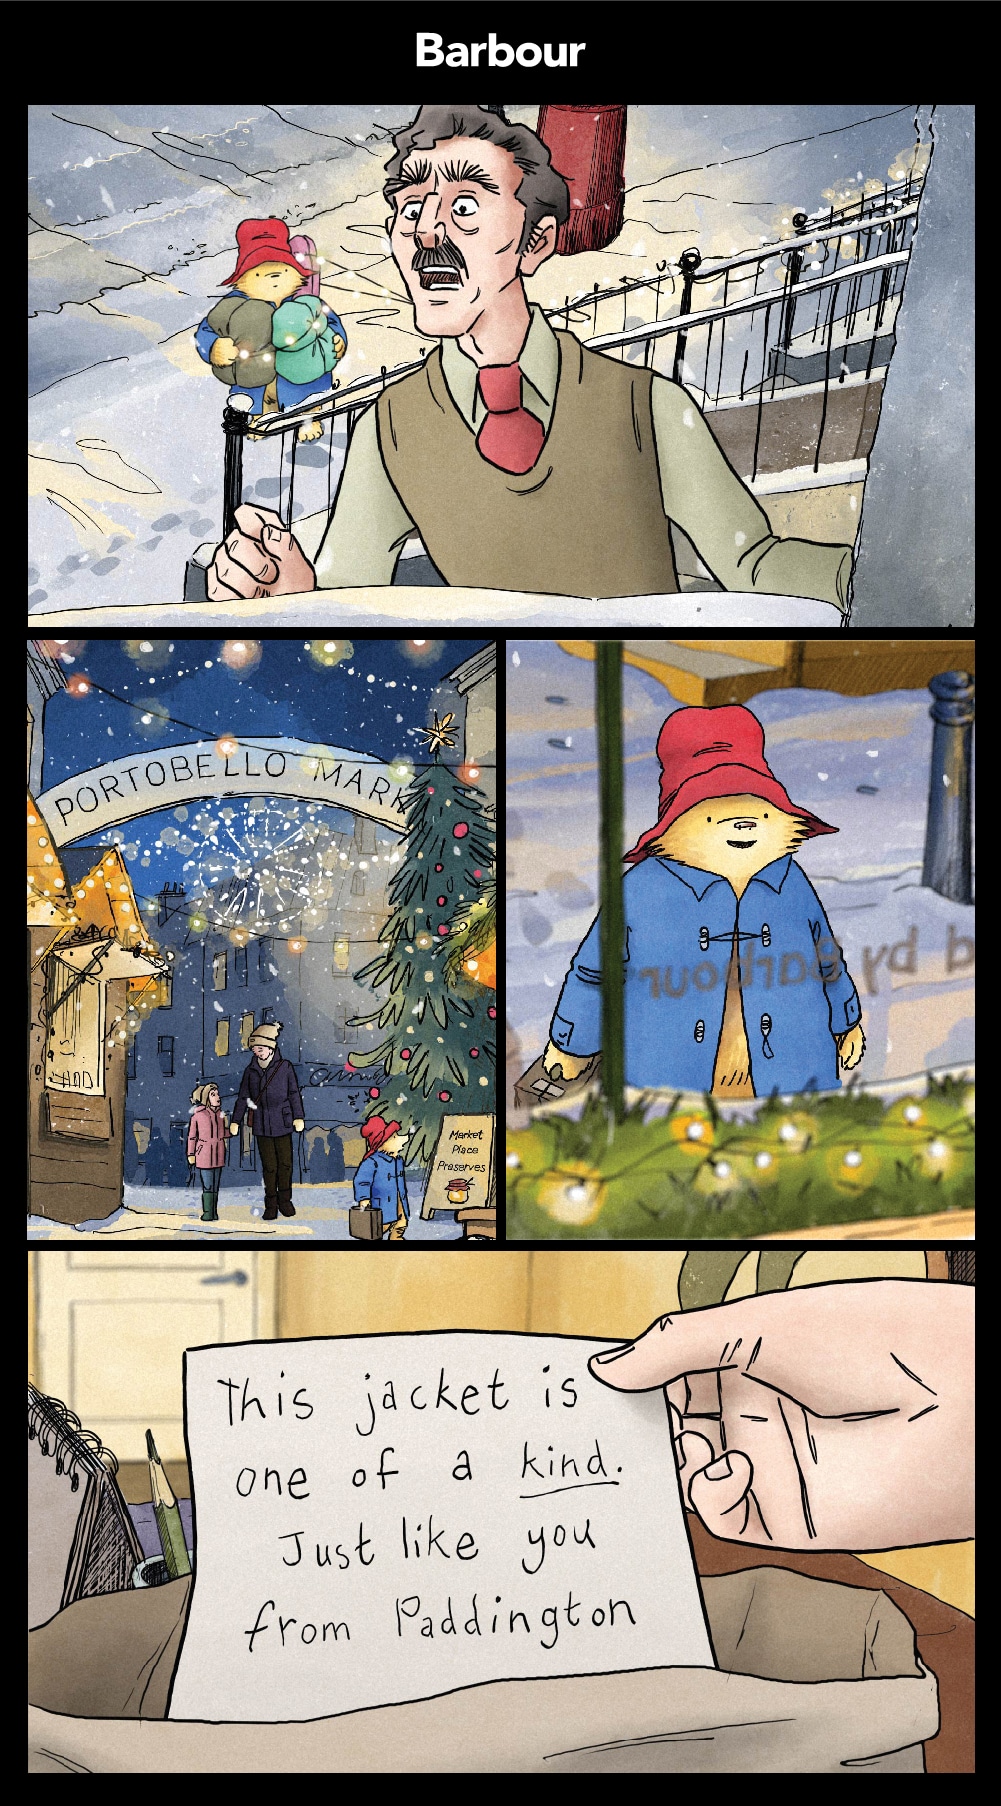 Barbour Christmas advert 2022 stills from YouTube video Paddington in a red hat blue duffel coat and tattered brief case mr. curry with a shocked face snowy town landscape of portobello mark Christmas note with a heartwarming message blog post